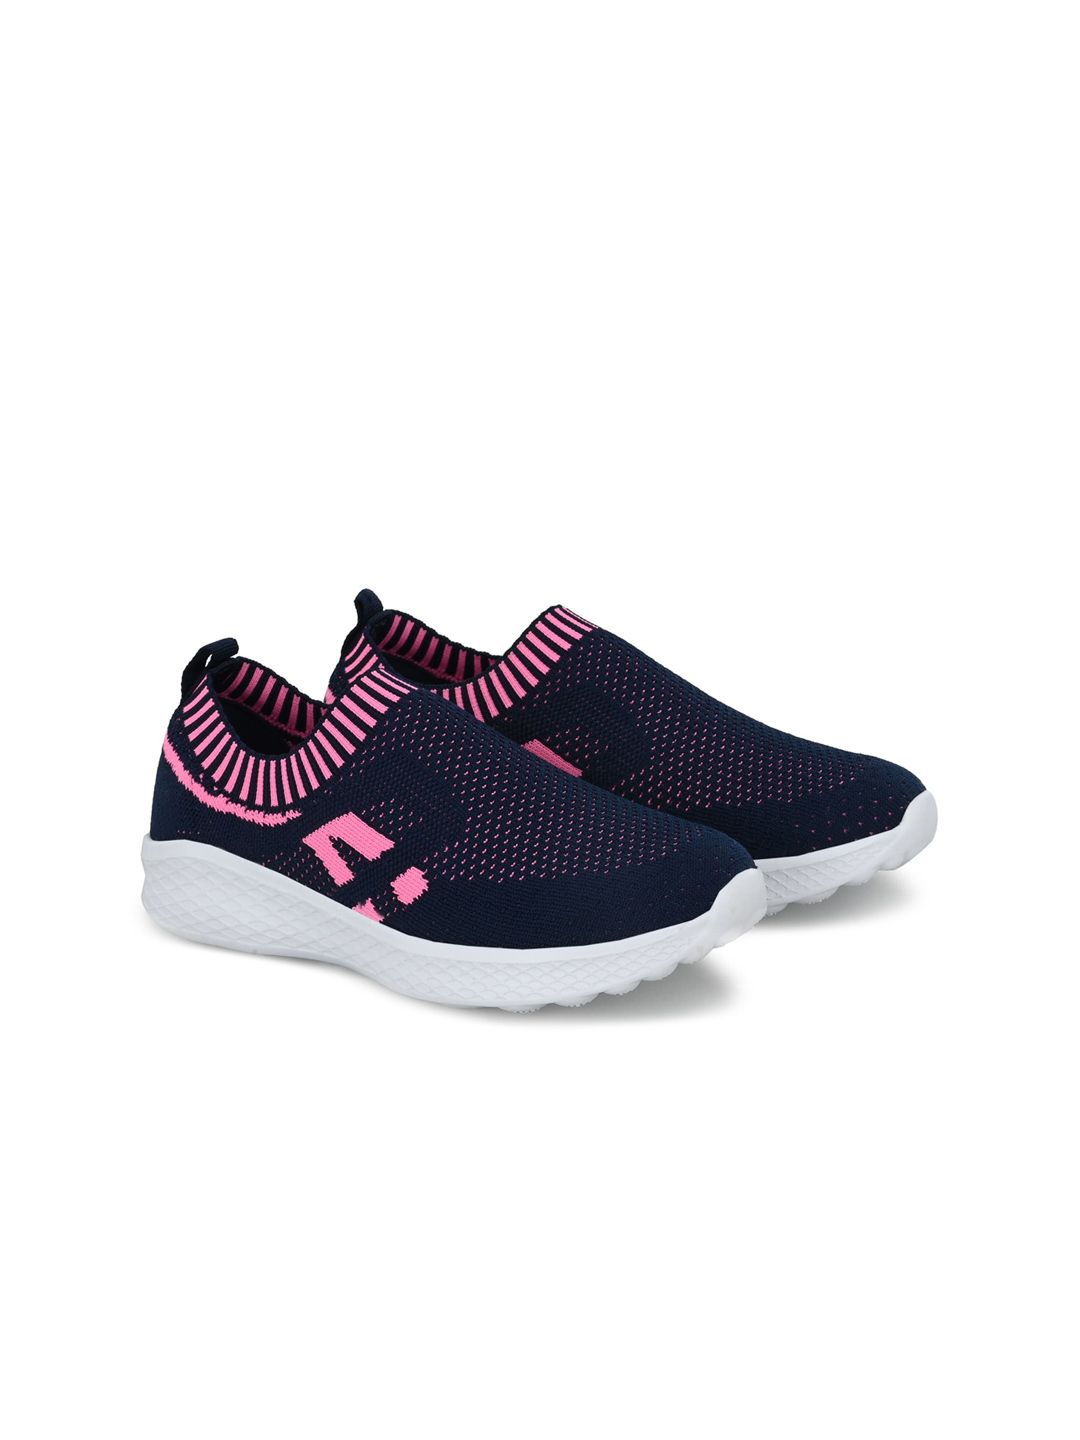 Roadster Women Navy Blue & Pink Perforation Slip-On Sneakers Price in India